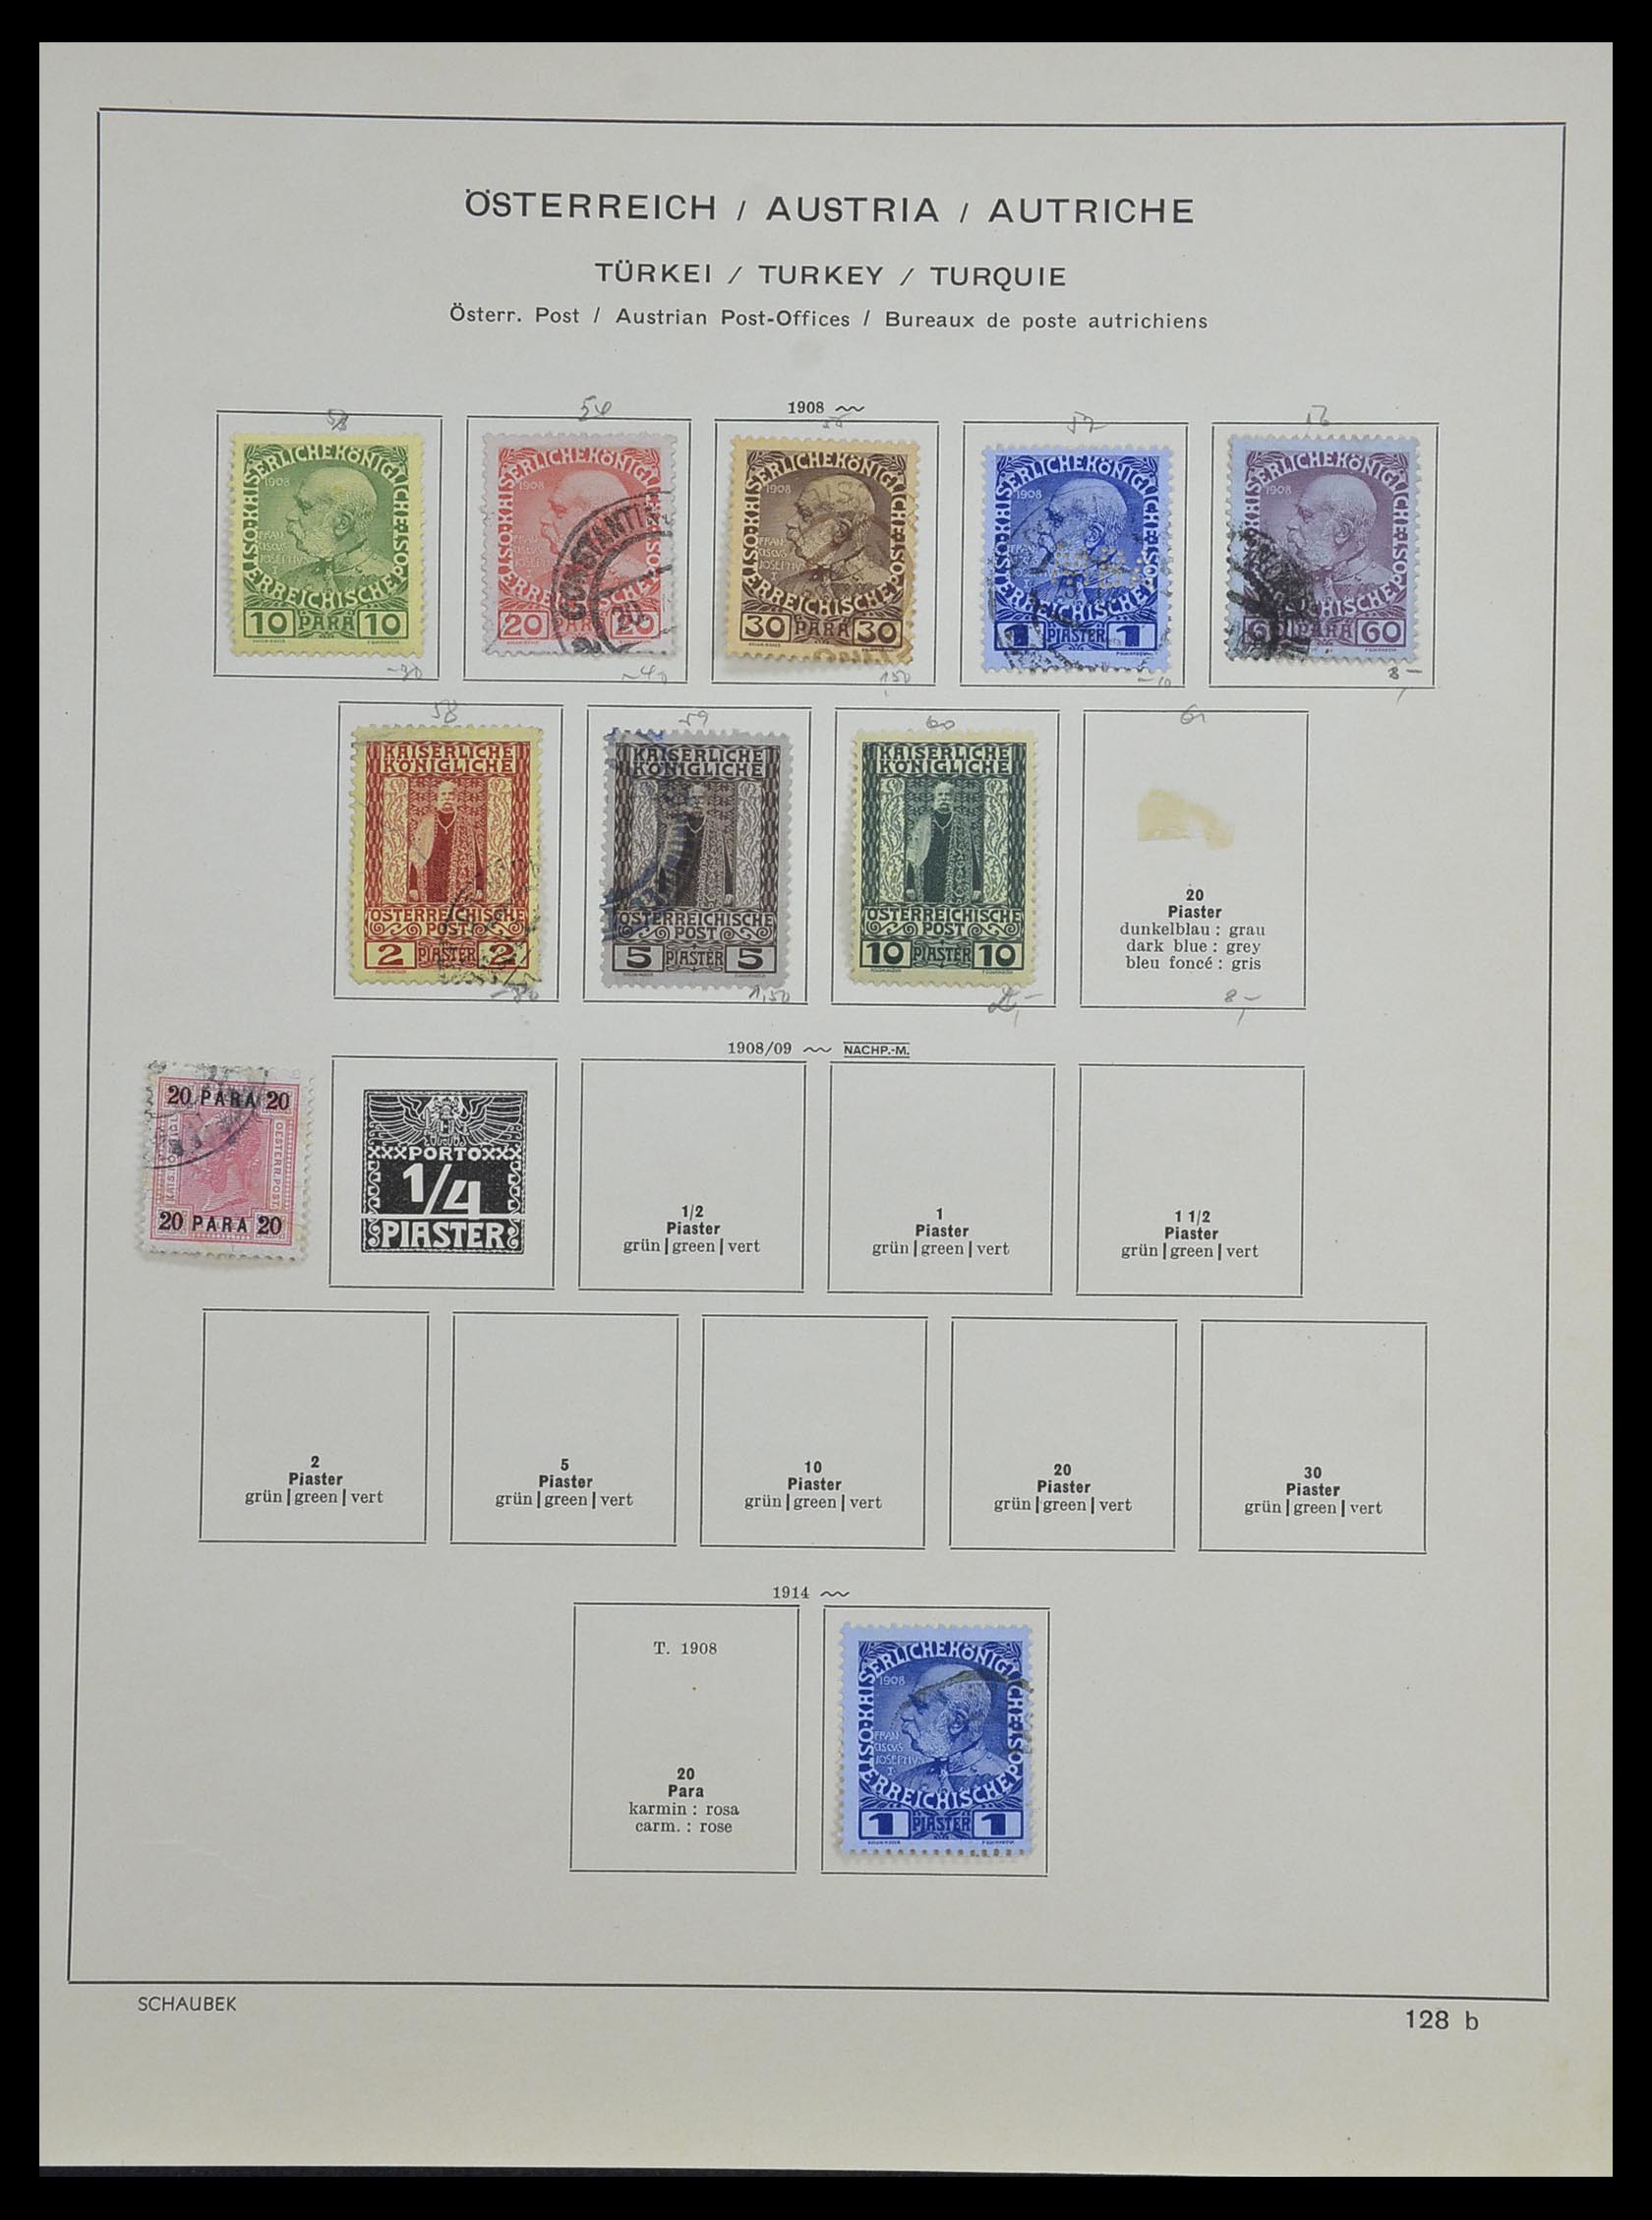 33594 044 - Stamp collection 33594 Austria and territories 1850-1918.